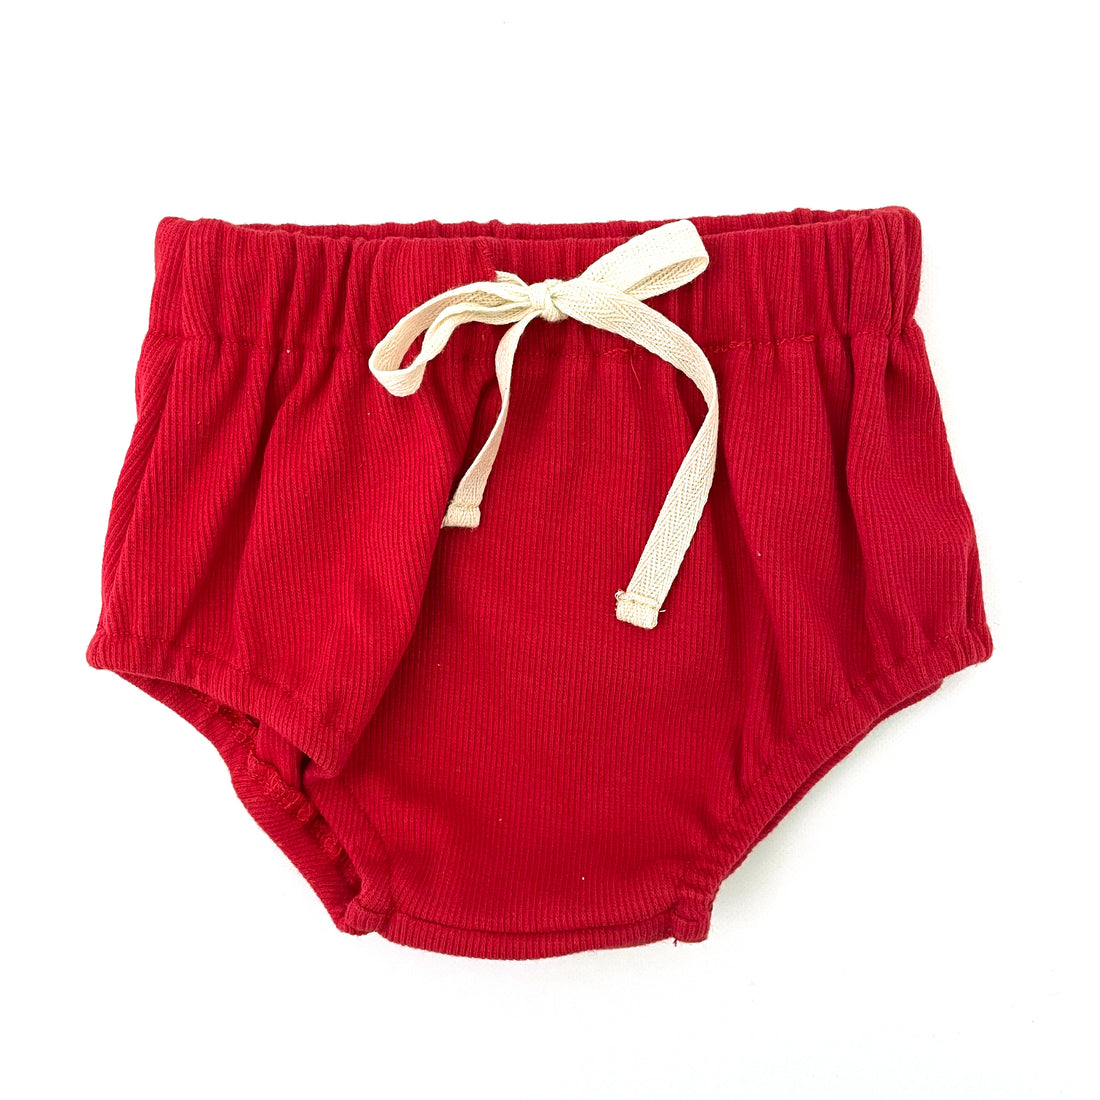 BASICS Ribbed Bloomers - CHERRY RED